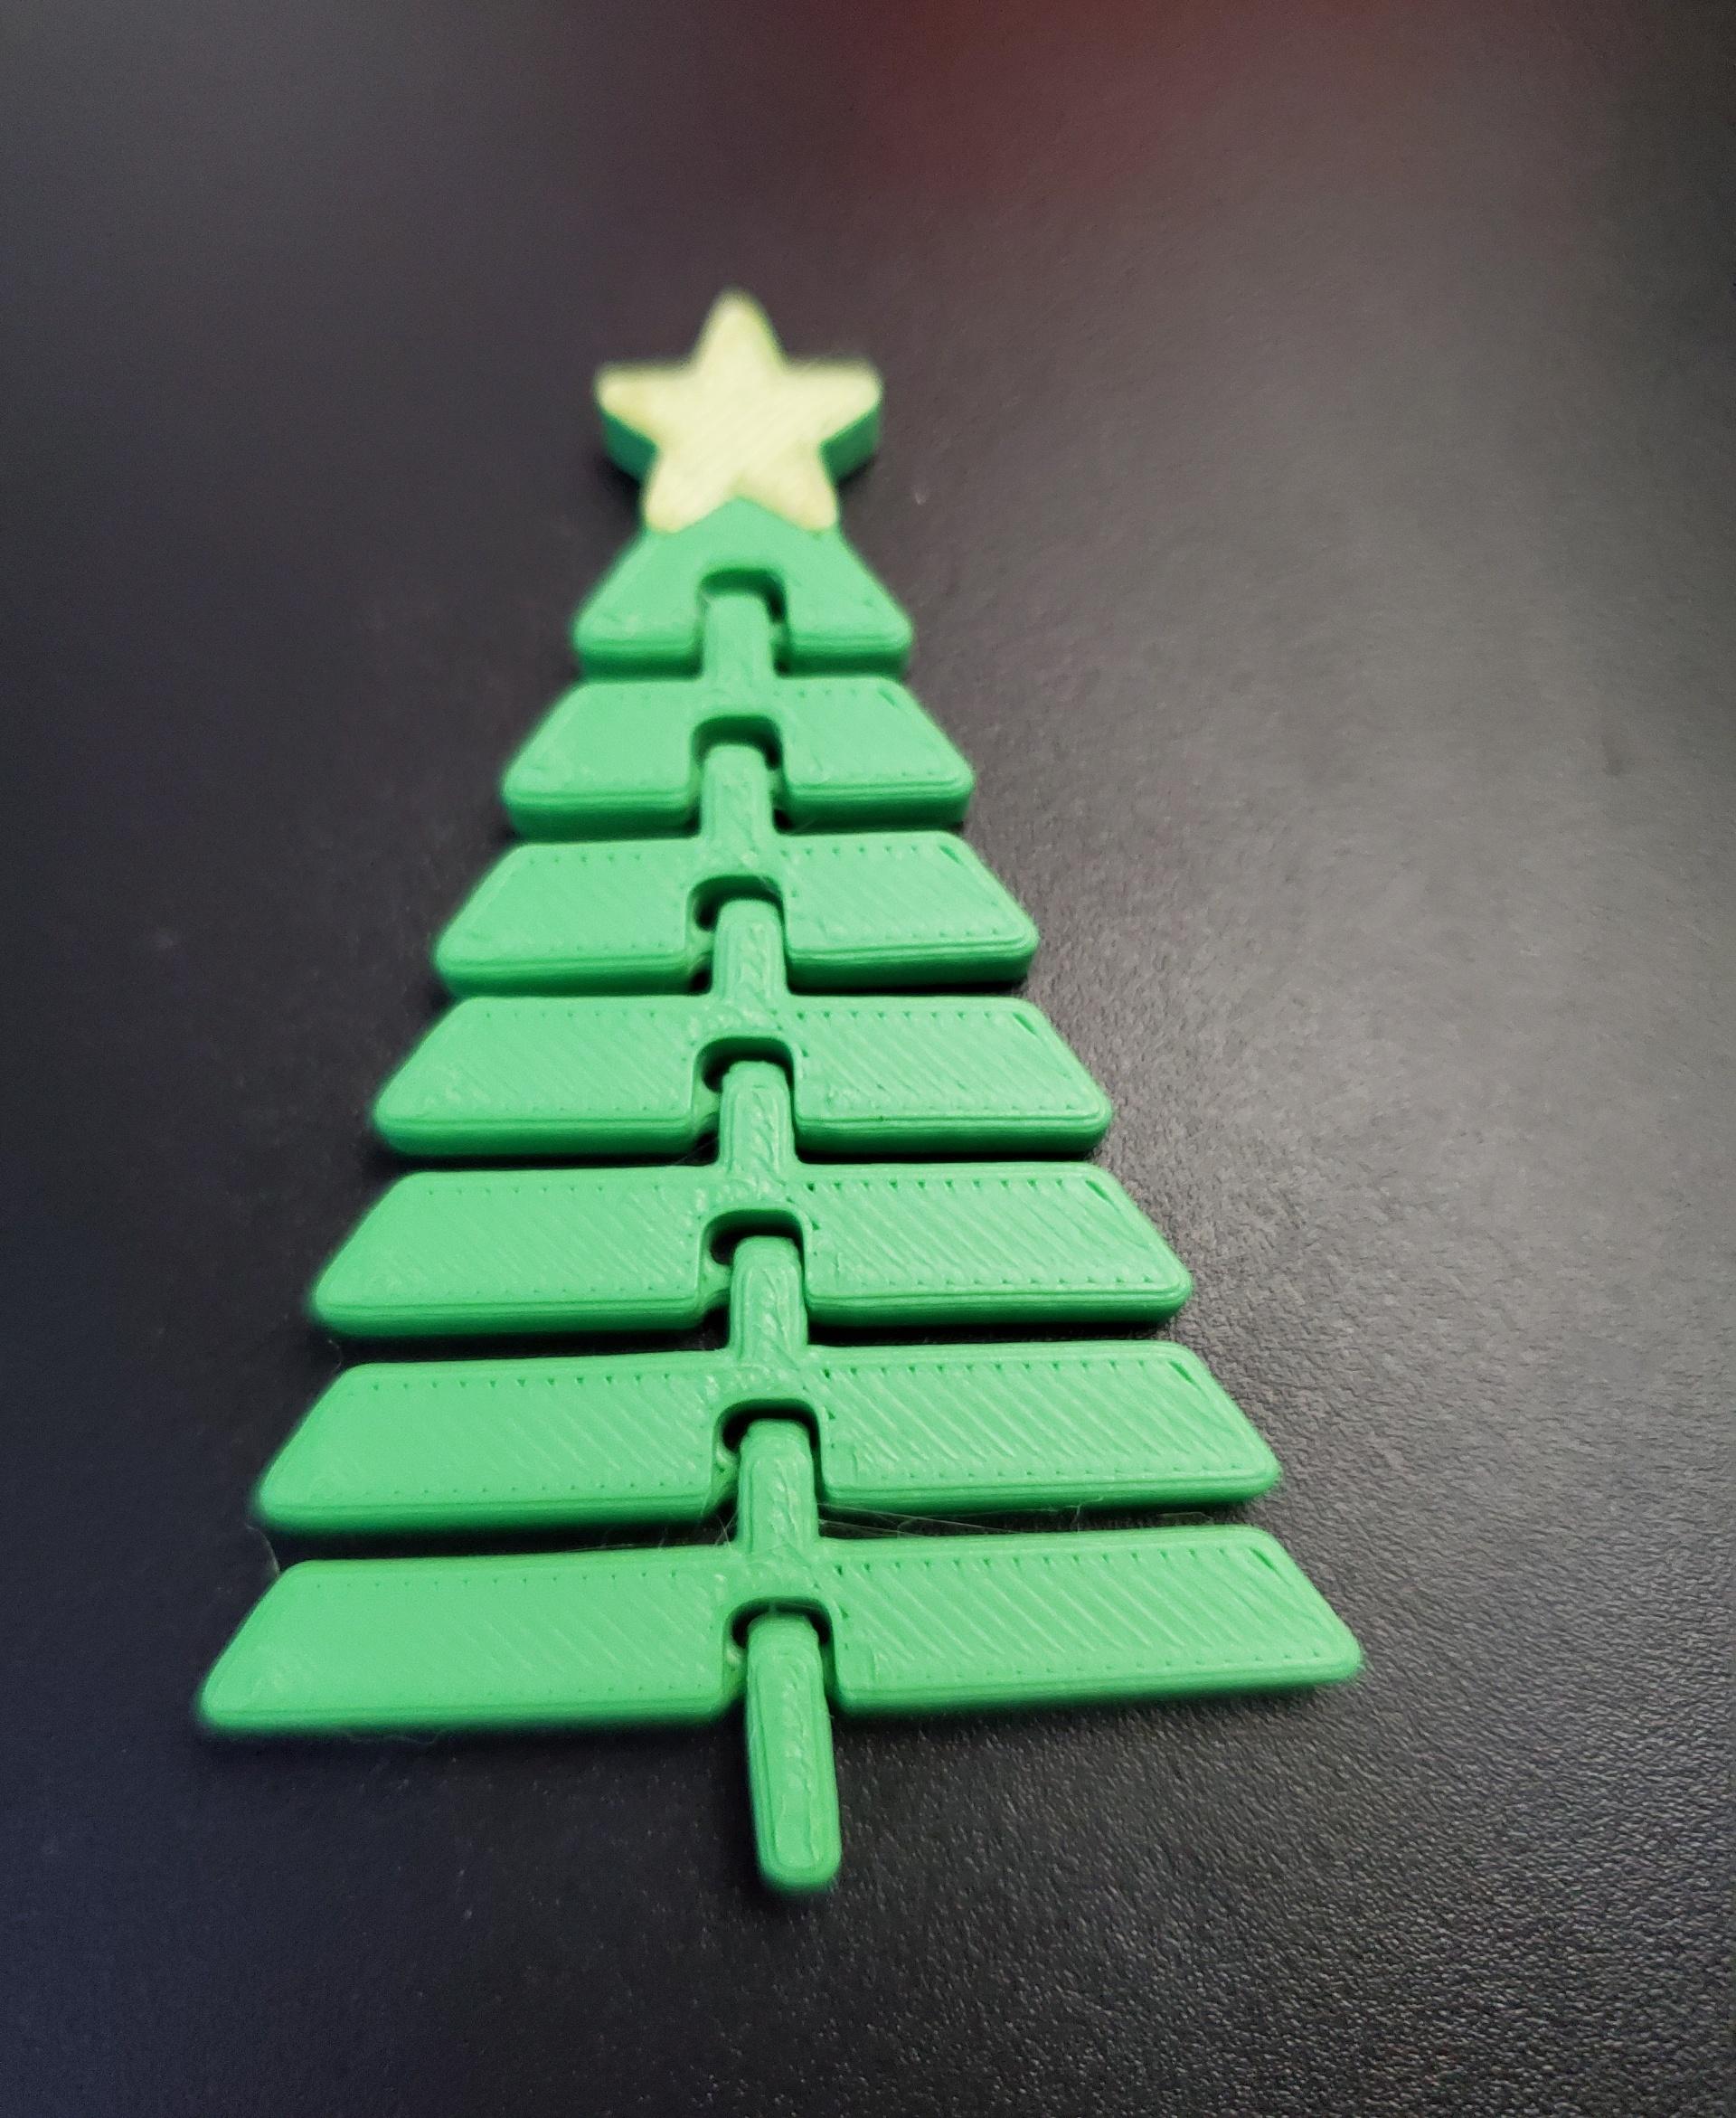 Articulated Christmas Tree with Star - Print in place fidget toy - 3mf - polyterra forest green - 3d model